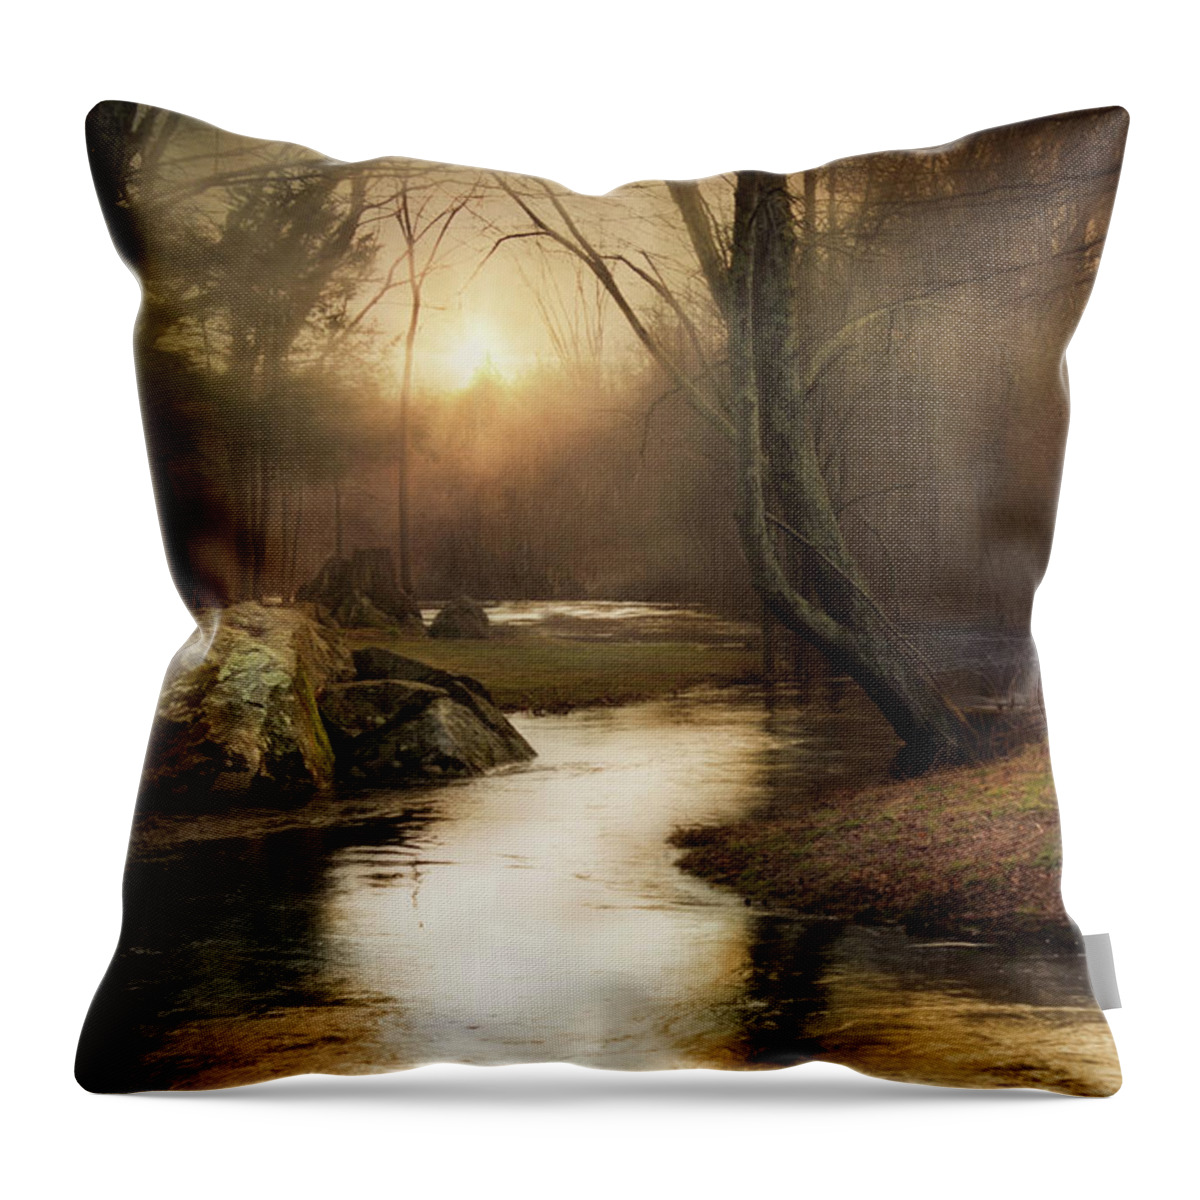 Woodland Throw Pillow featuring the photograph Gilded Woodland by Robin-Lee Vieira